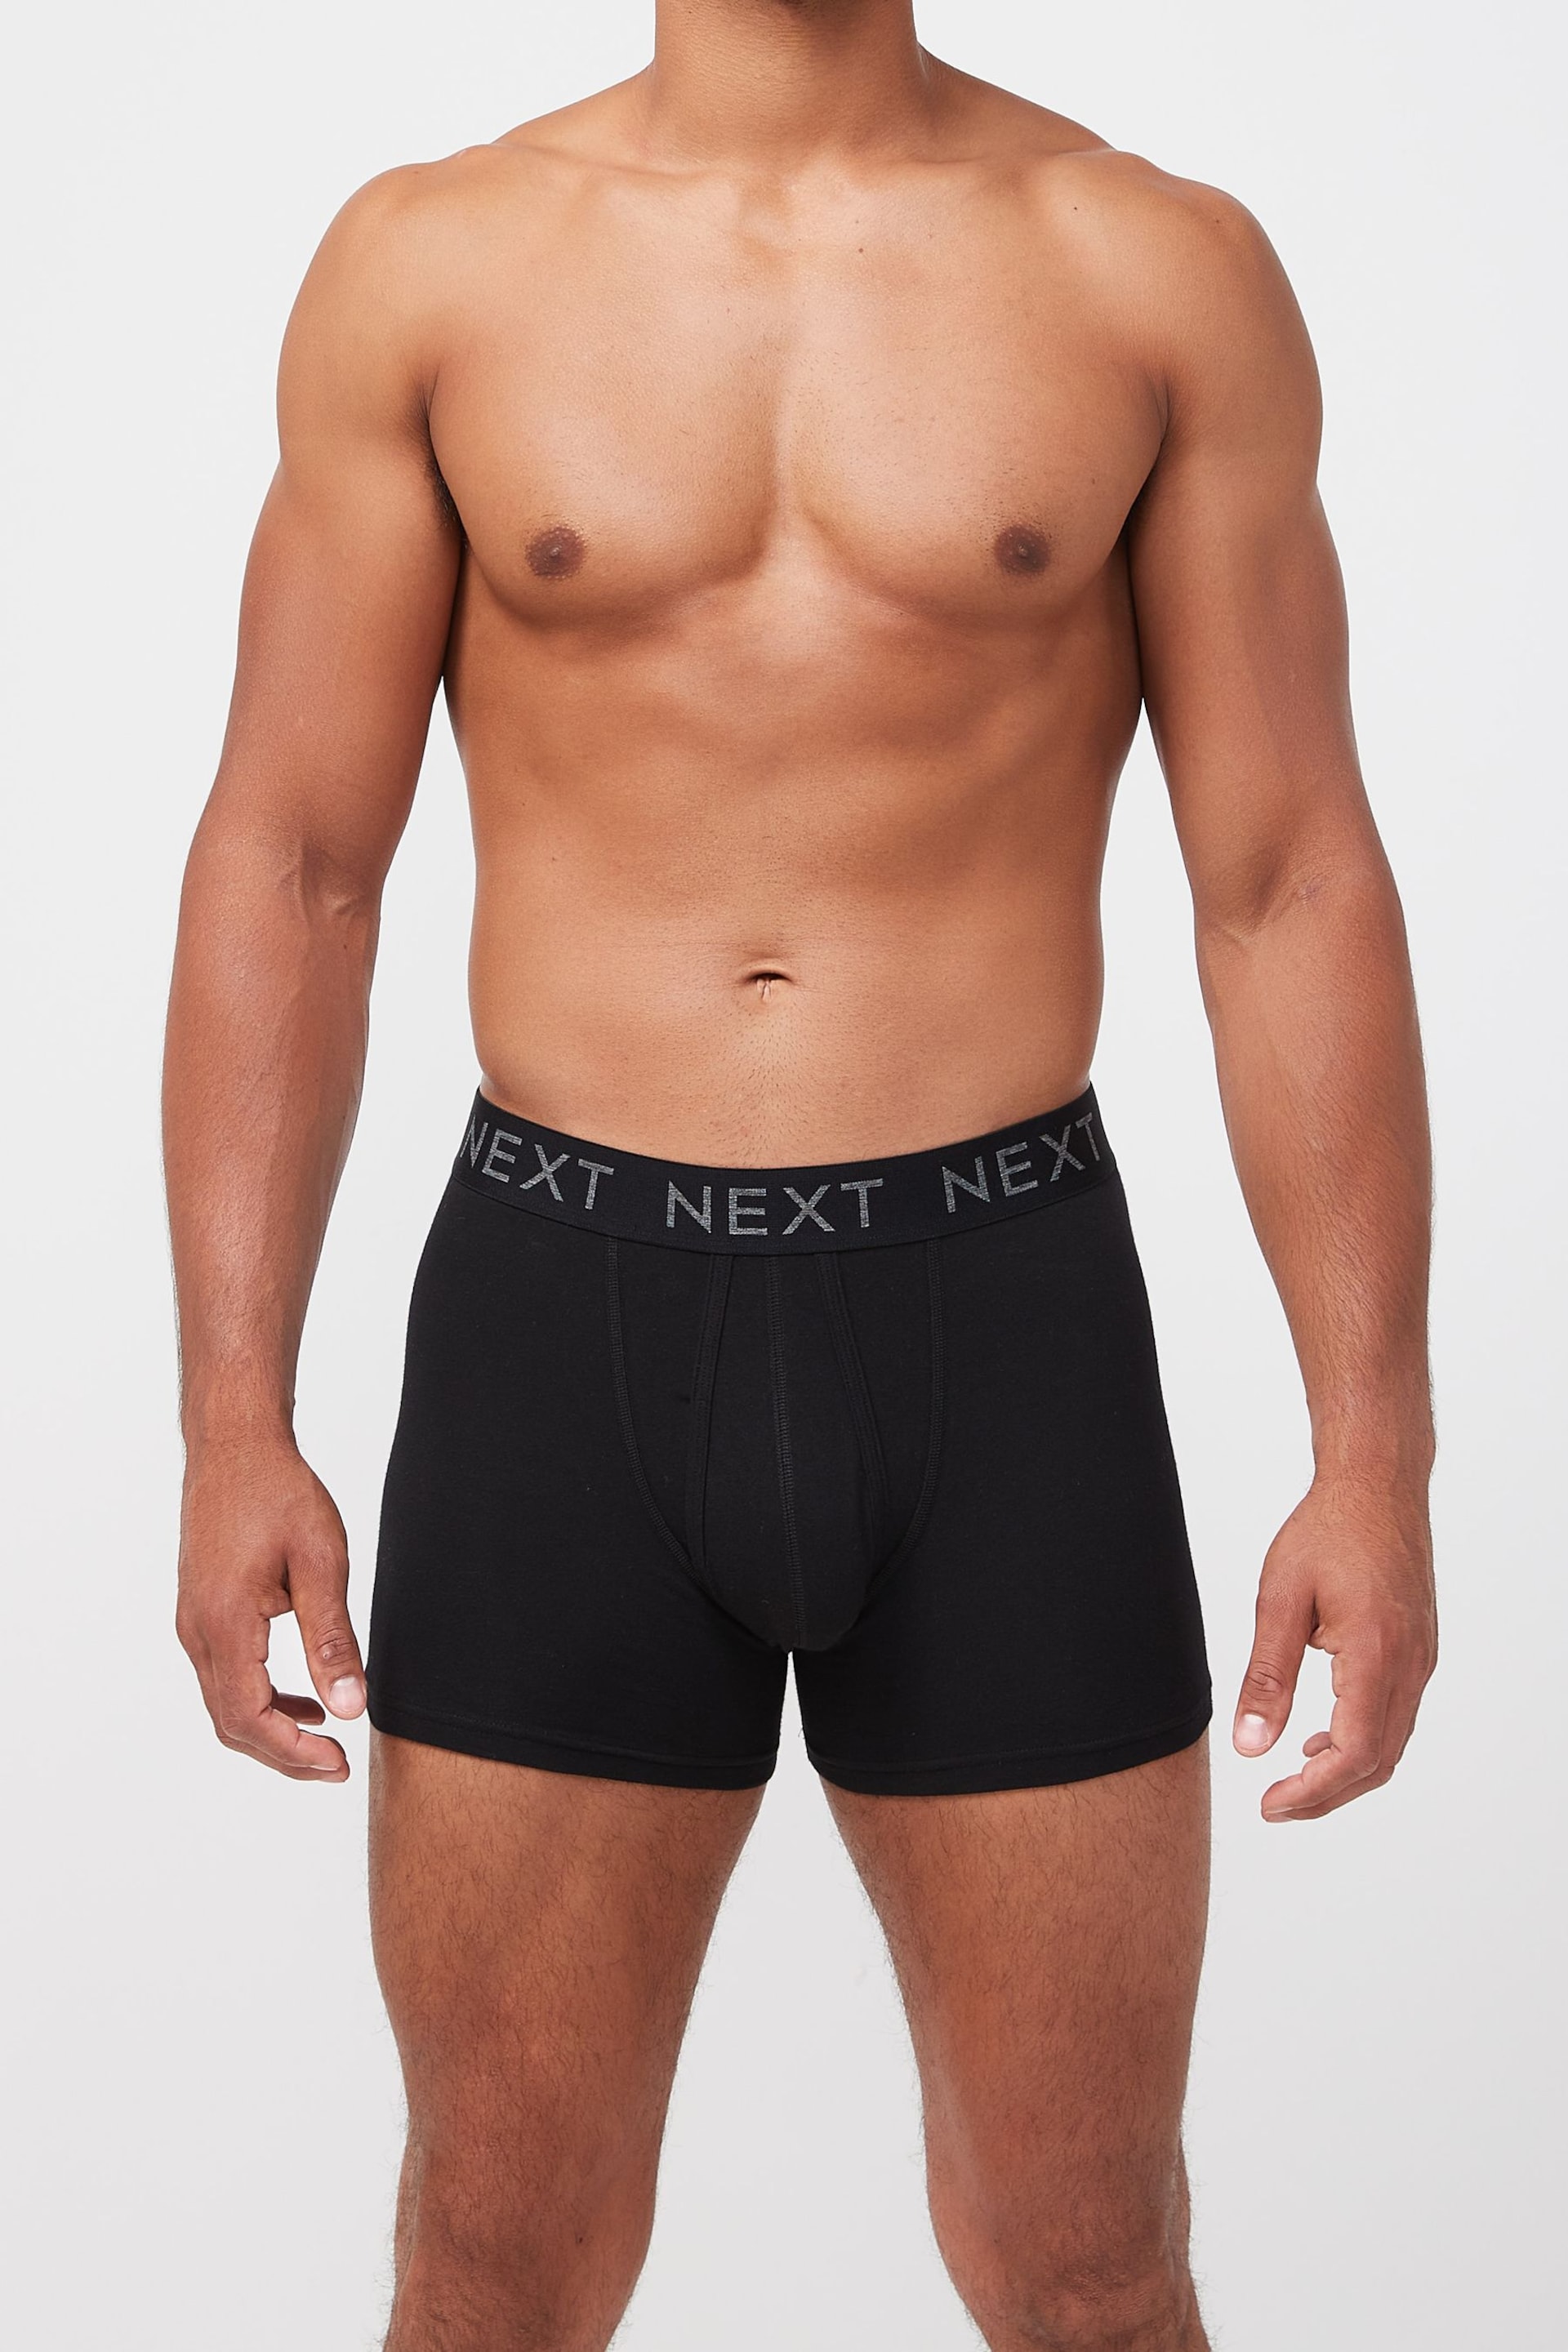 Black 4 pack A-Front Boxers - Image 4 of 6